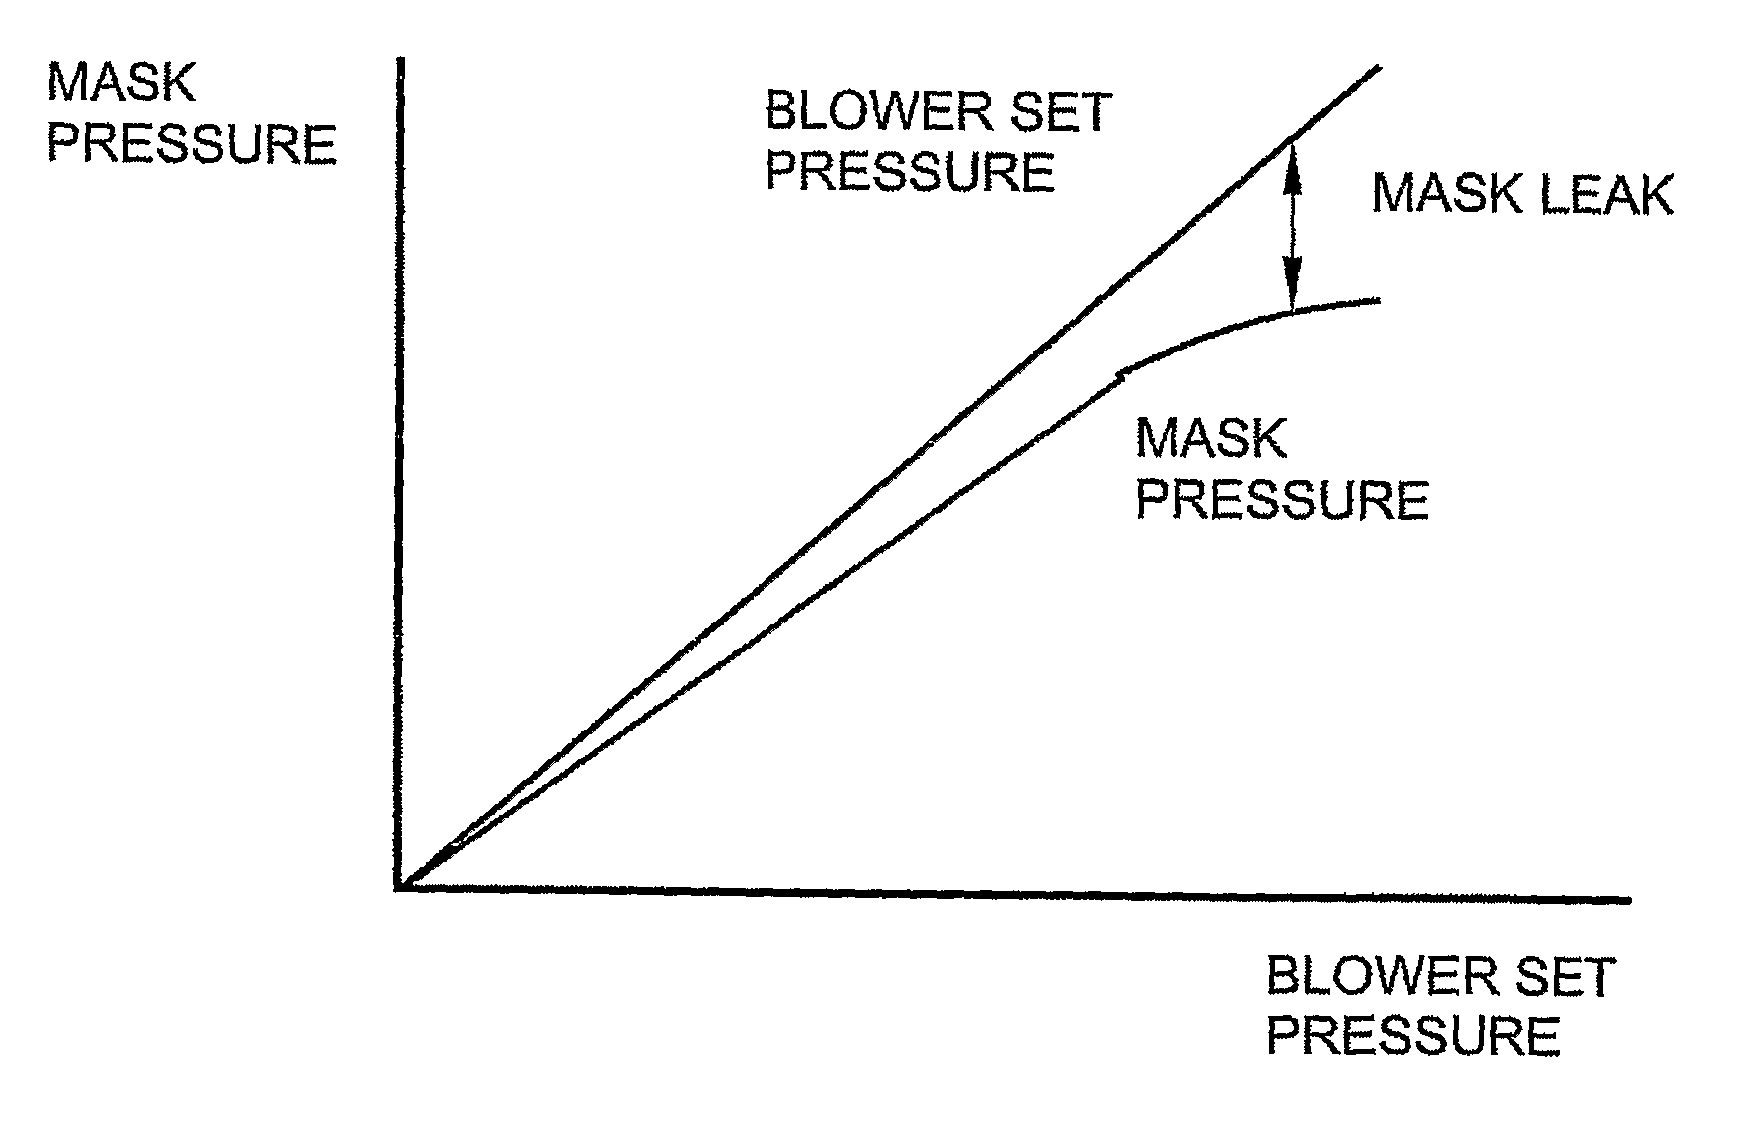 Methods and apparatus for controlling mask leak in CPAP treatment